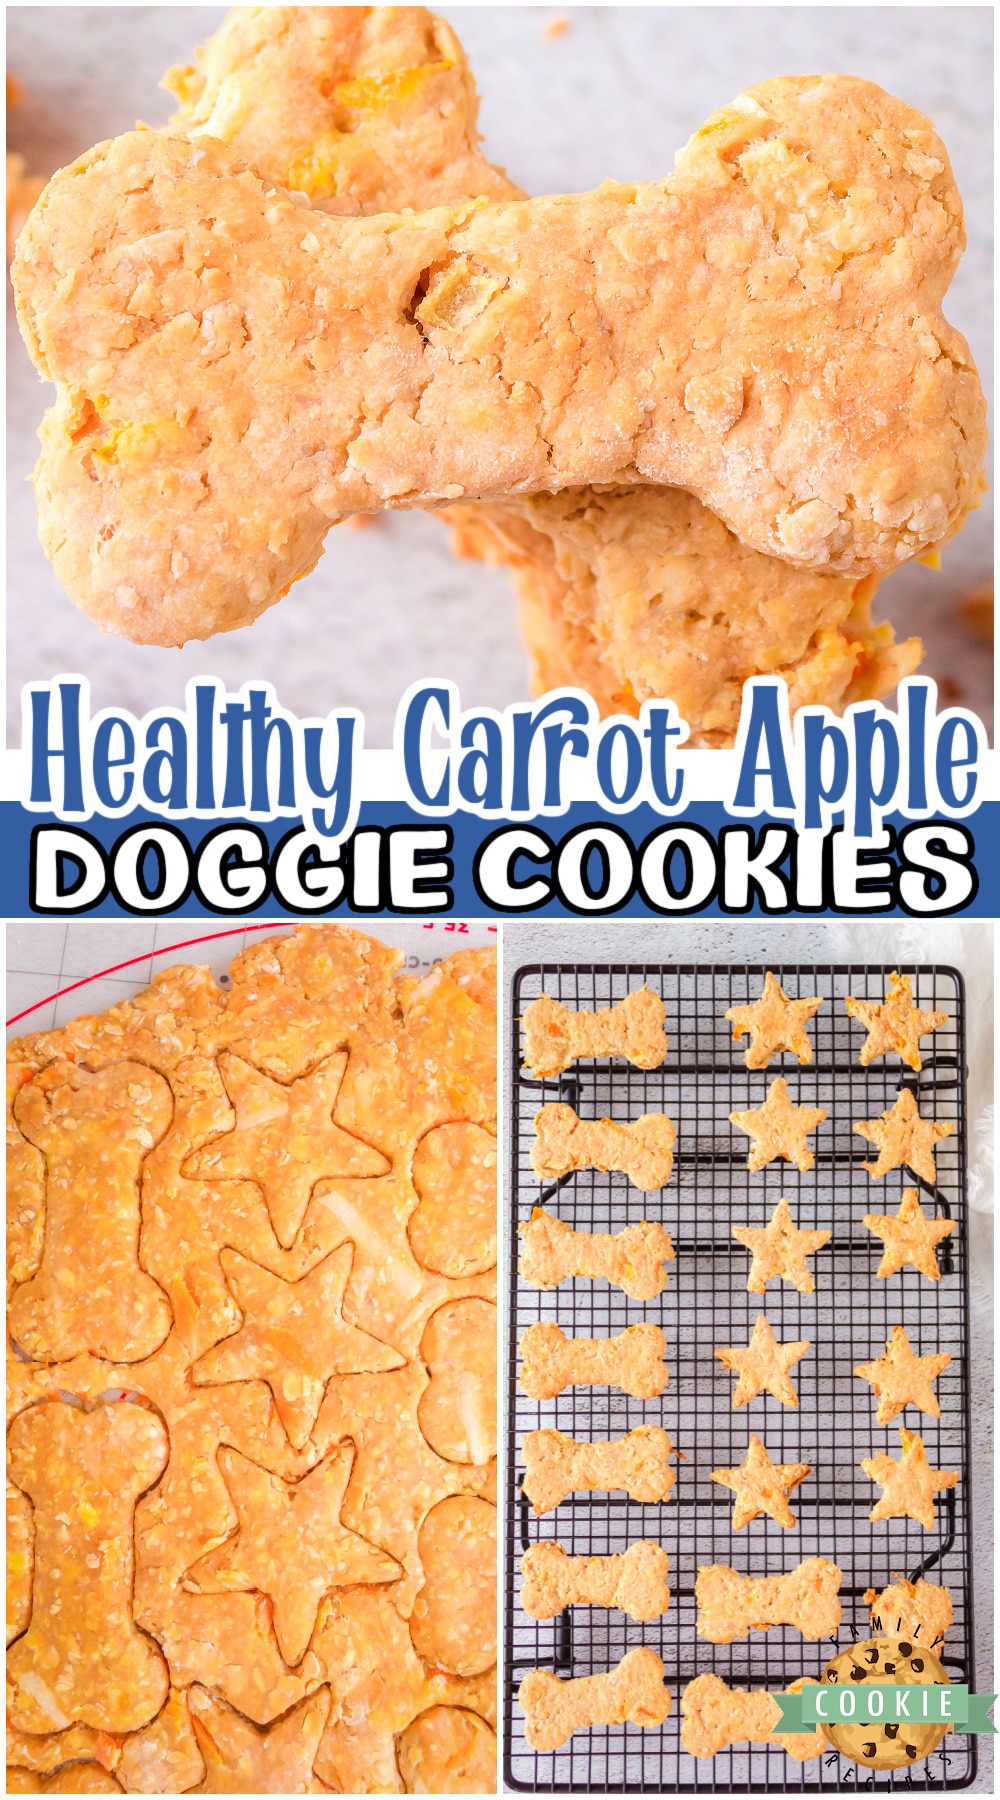 Healthy Homemade Dog Cookies made with carrot, oats, peanut butter & apple! Our favorite healthy dog treat recipe is packed with nutrients, easily made at home and is perfect for your favorite fur friend! 